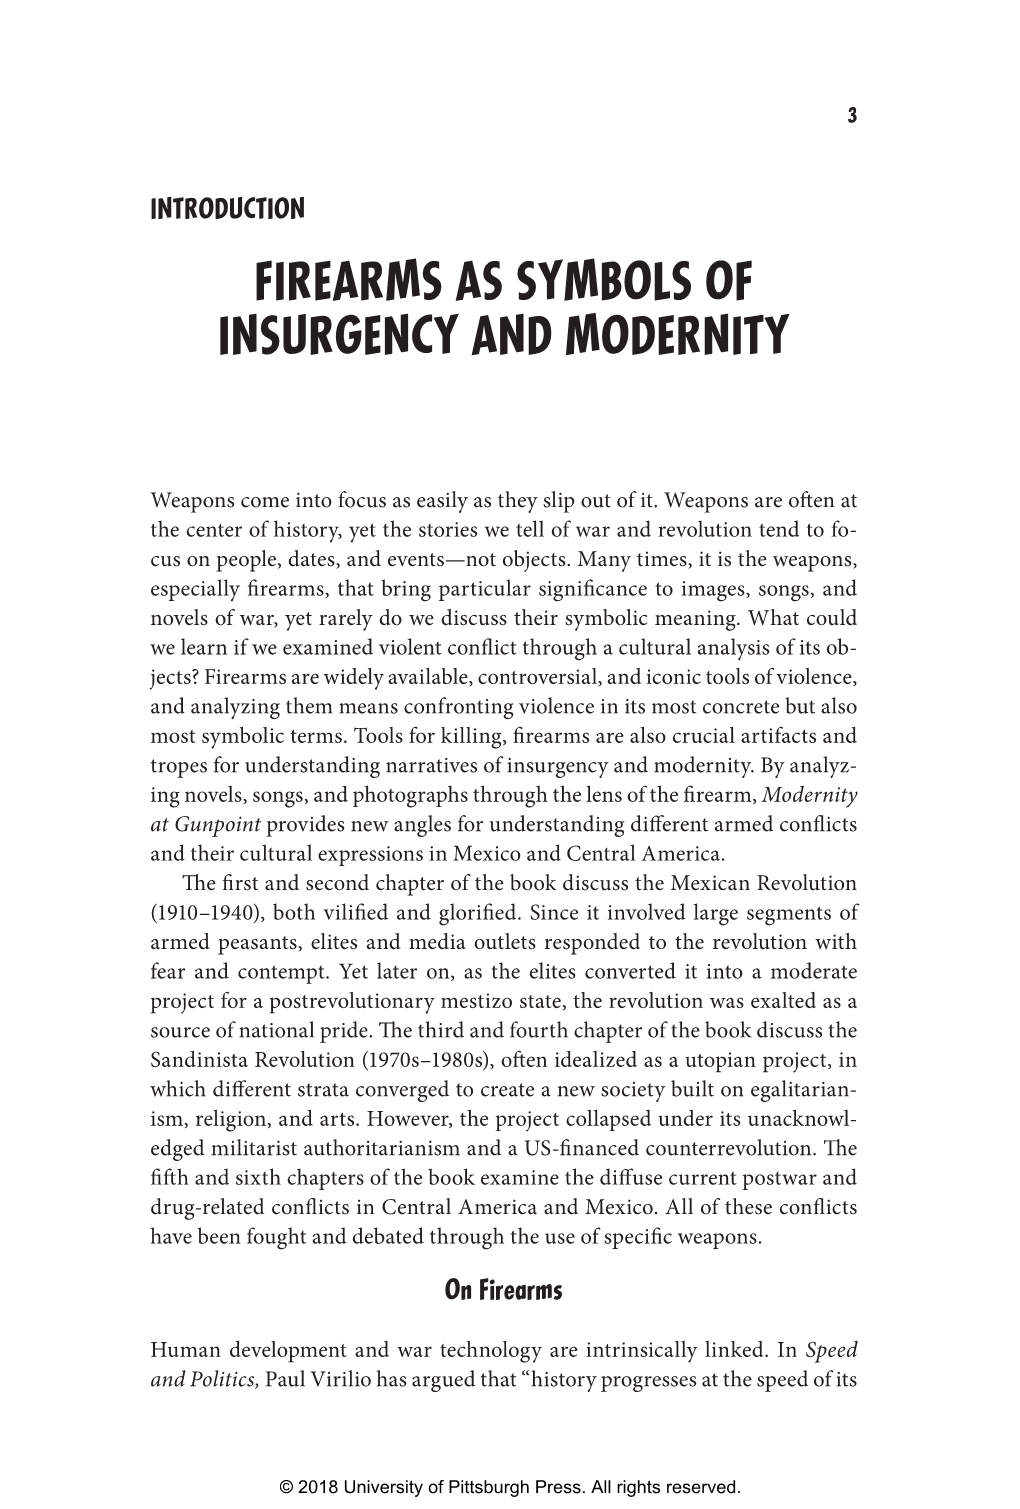 Firearms As Symbols of Insurgency and Modernity